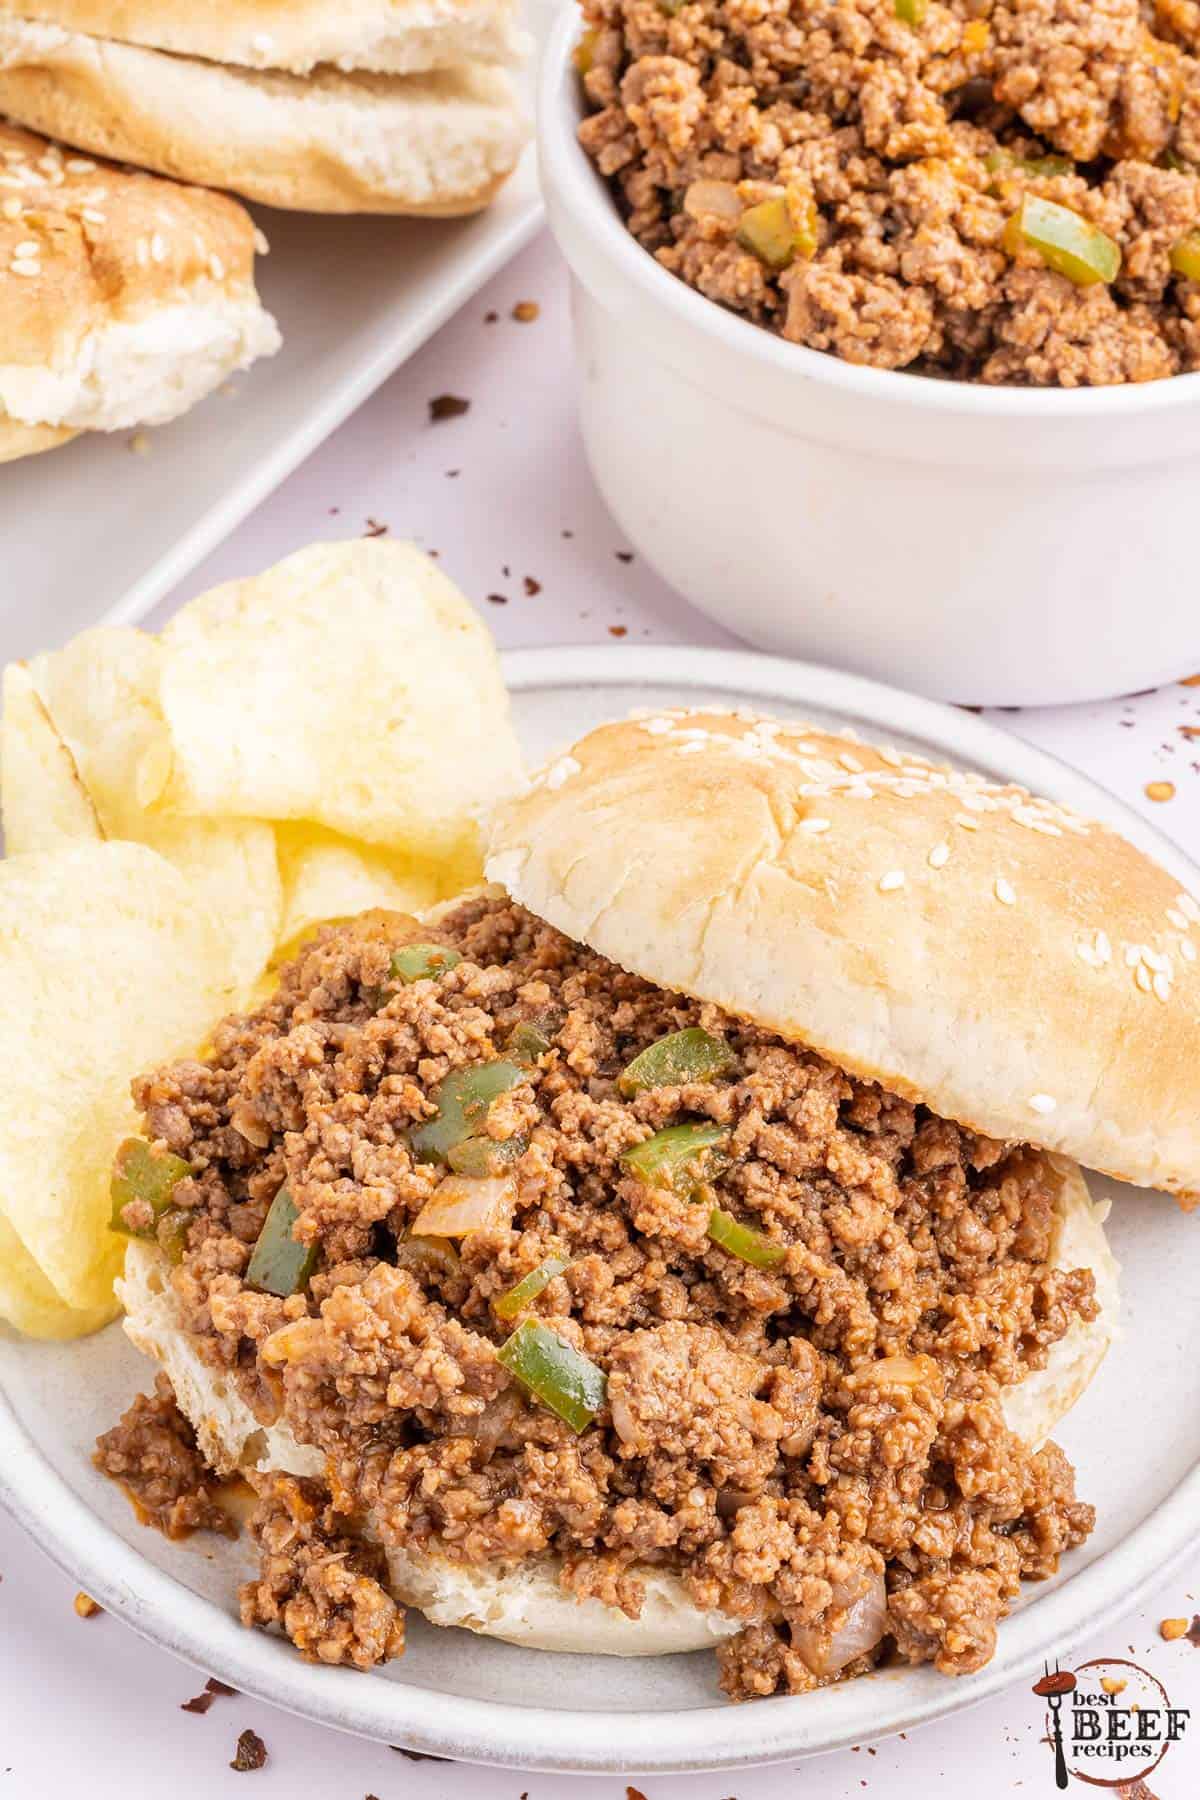 a sesame bun topped with sloppy joe mix with chips